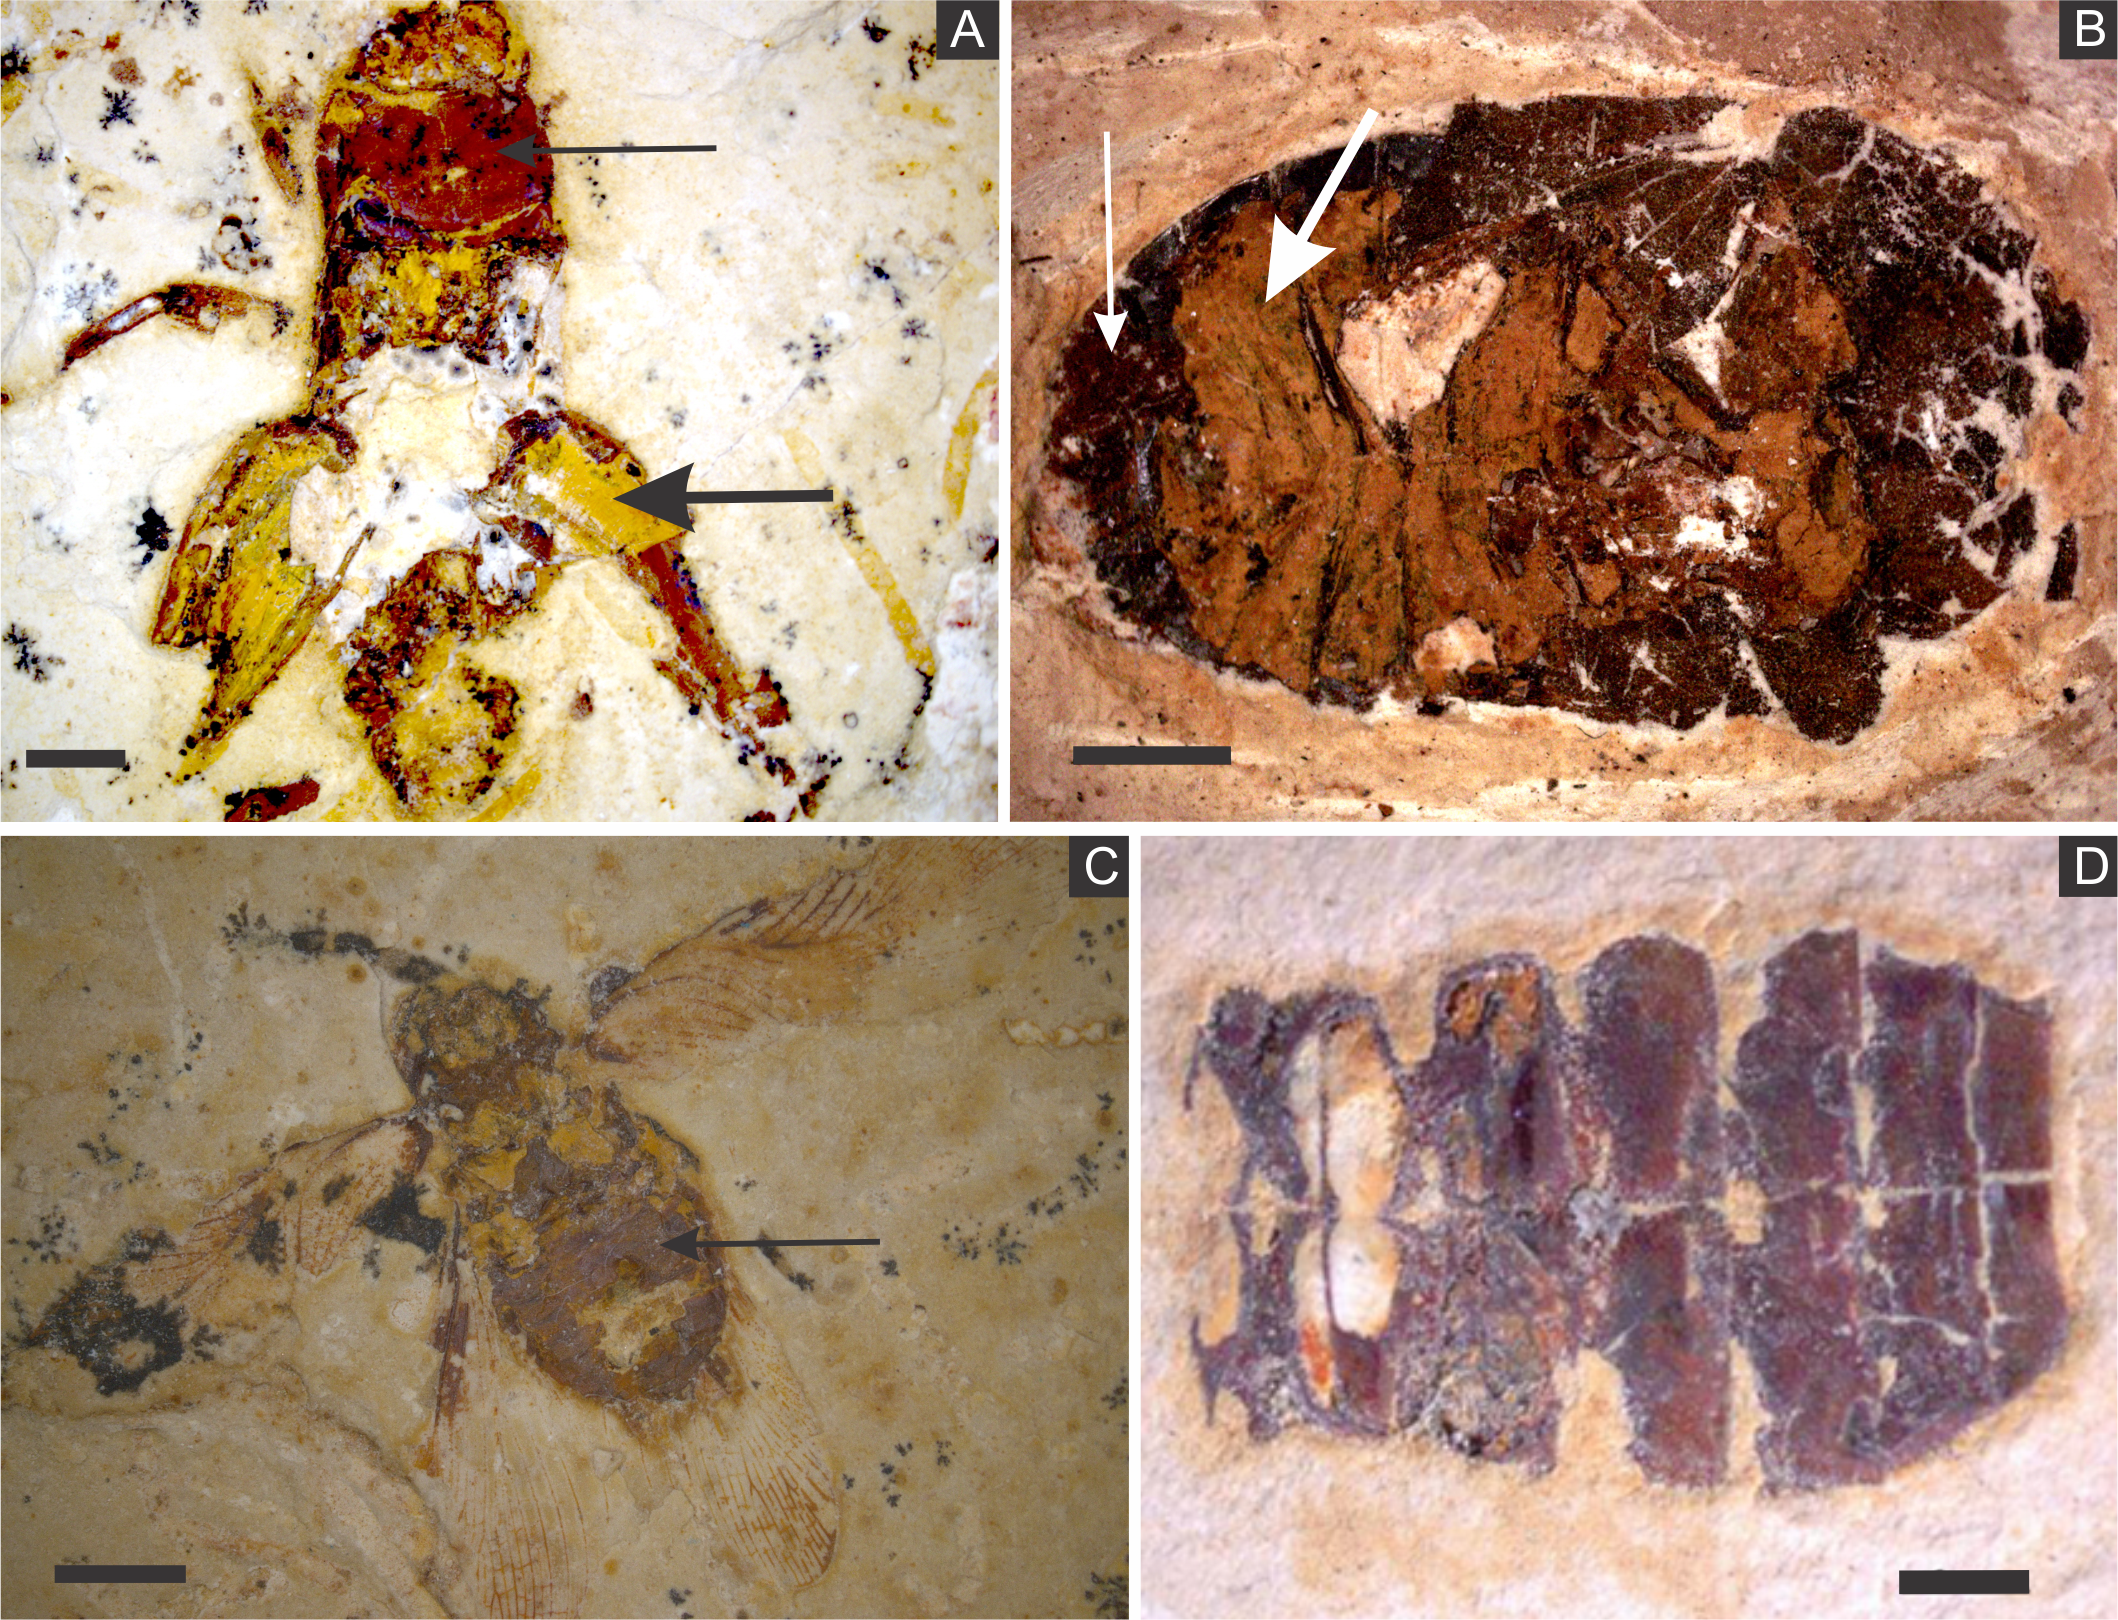 PDF) REPLACEMENT OF IRON SULPHIDES BY OXIDES IN THE DINOSAUR BONE FROM THE LANCE  FM. (WYOMING, USA) – PRELIMINARY STUDY